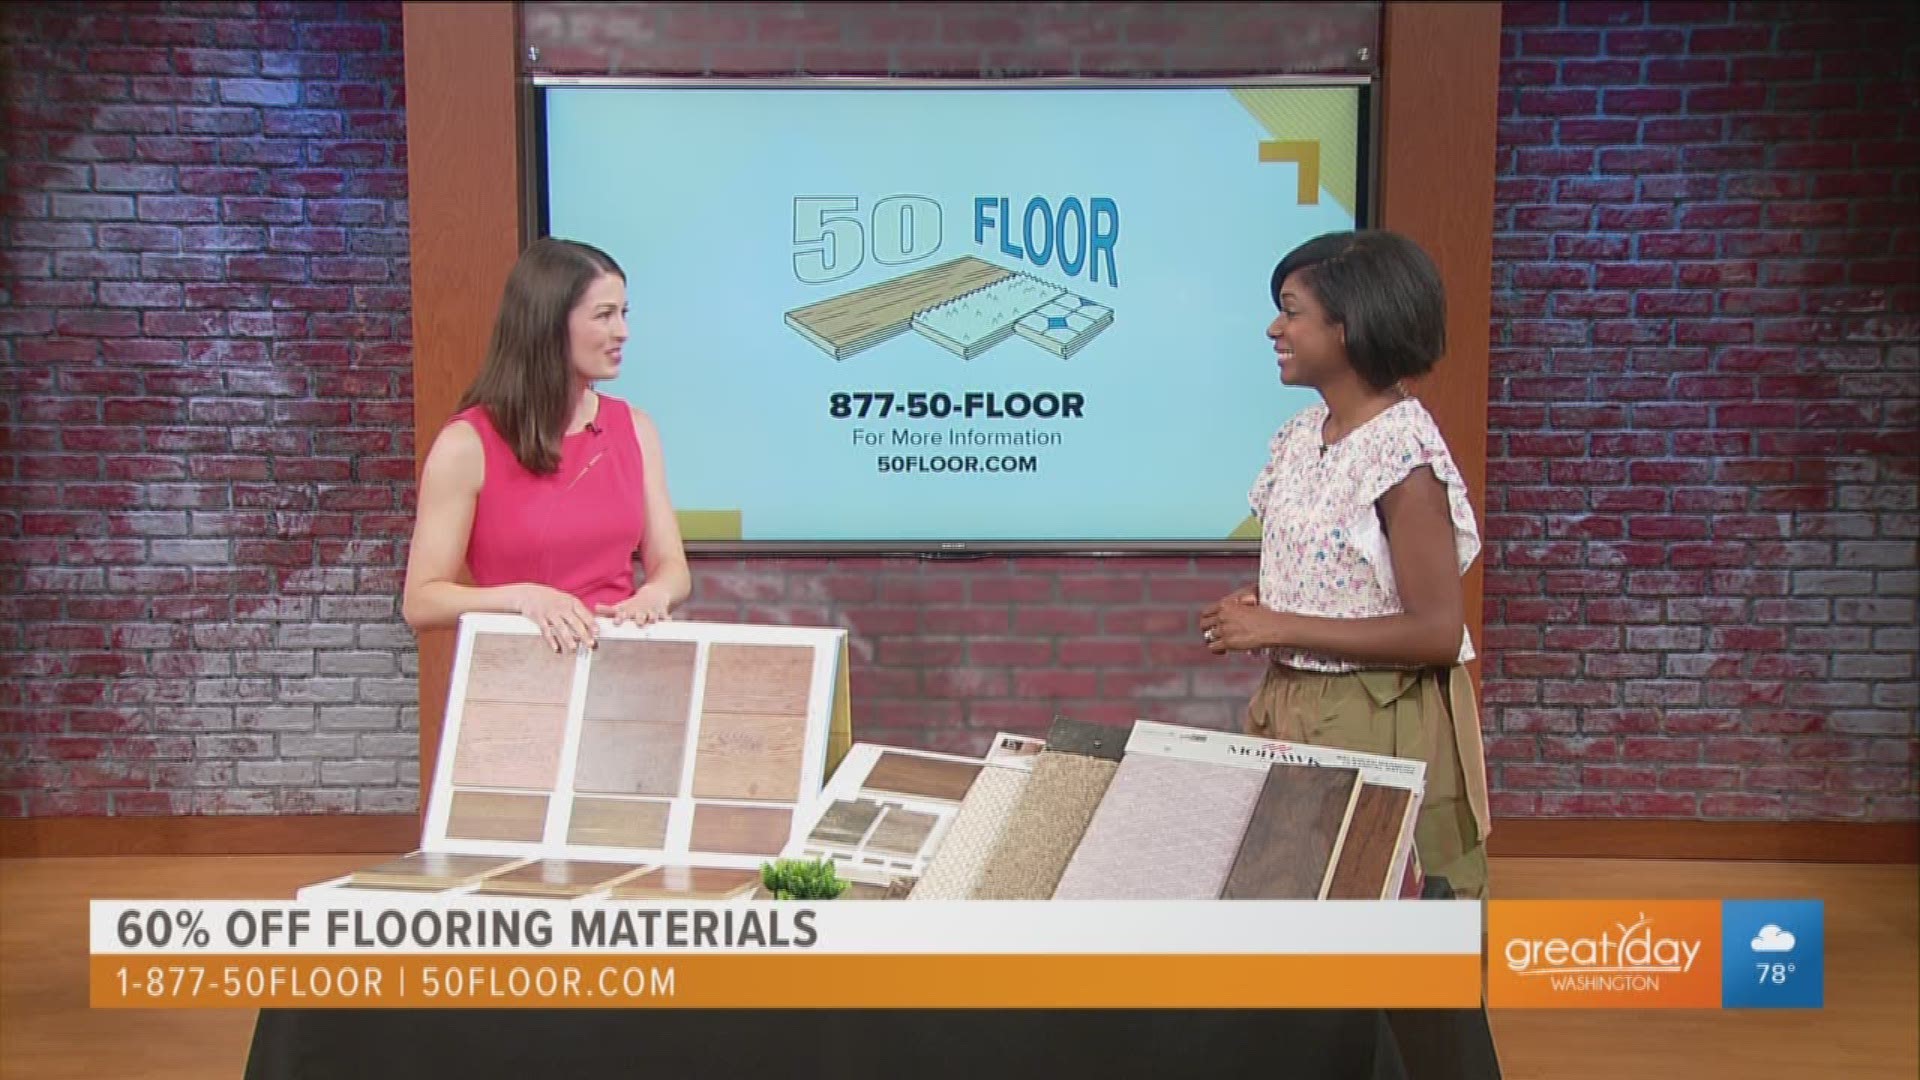 Get 60 percent off flooring materials from 50 Floor during the month of June. The deal is almost over so call 1-877-50FLOOR or go to www.50FLOOR.com to get great savings on flooring.